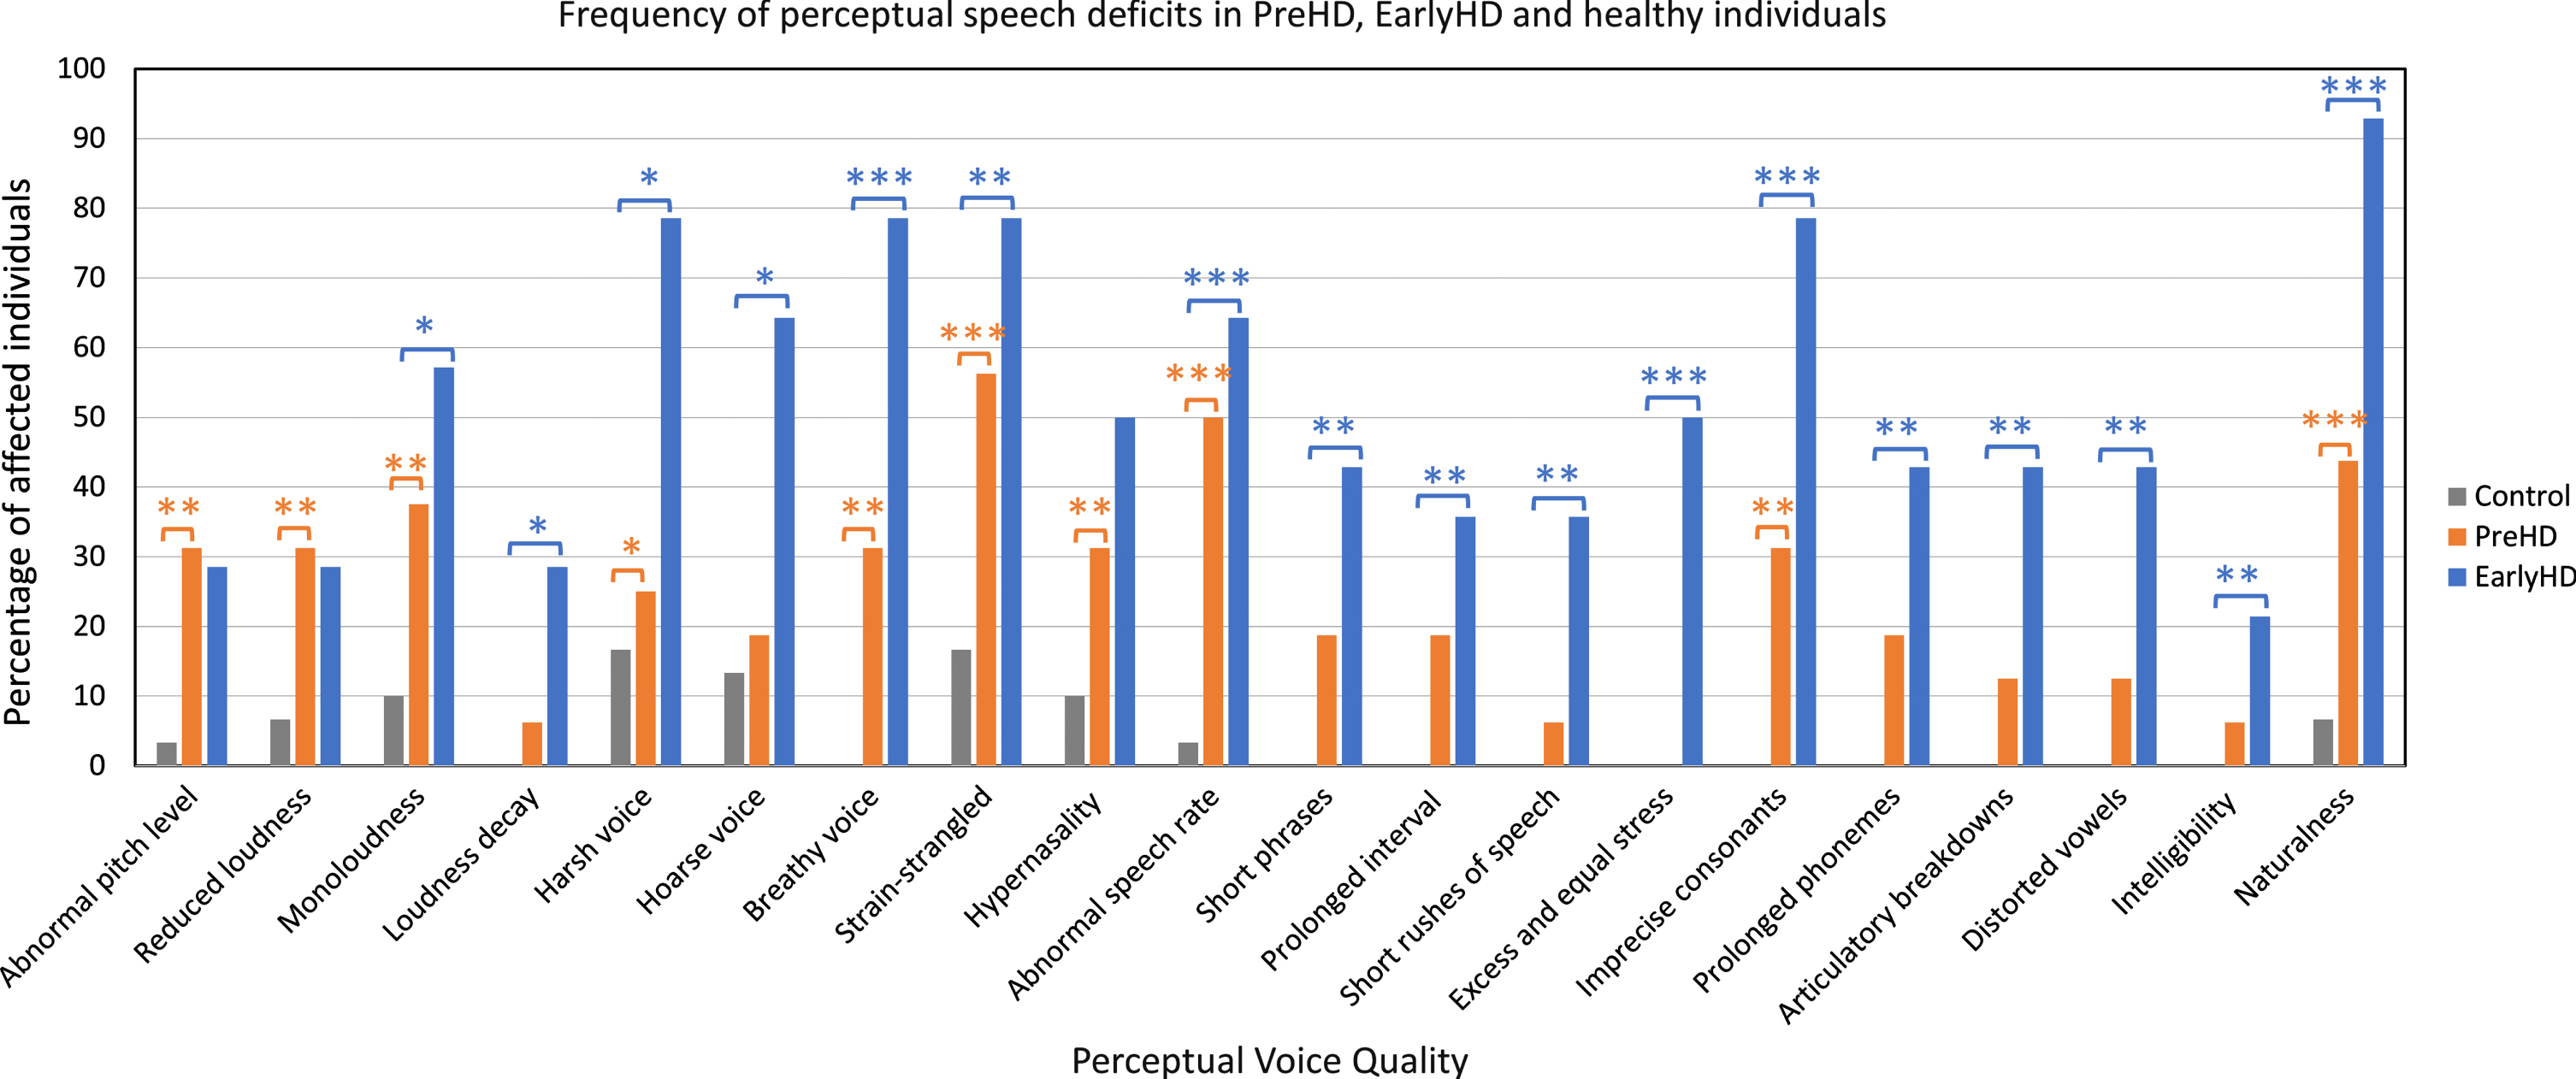 Frequency of speech deficits (in percentages) across PreHD, EarlyHD, and control participants based on perceptual assessment. aParticipants from Control-A and Control-B were combined in Fig. 1 (n = 30). Significant difference between PreHD and control groups: *p < 0.05; **p≤0.01; ***p≤0.001. Significant difference between EarlyHD and control groups: *p < 0.05; **p≤0.01; ***p≤0.001.